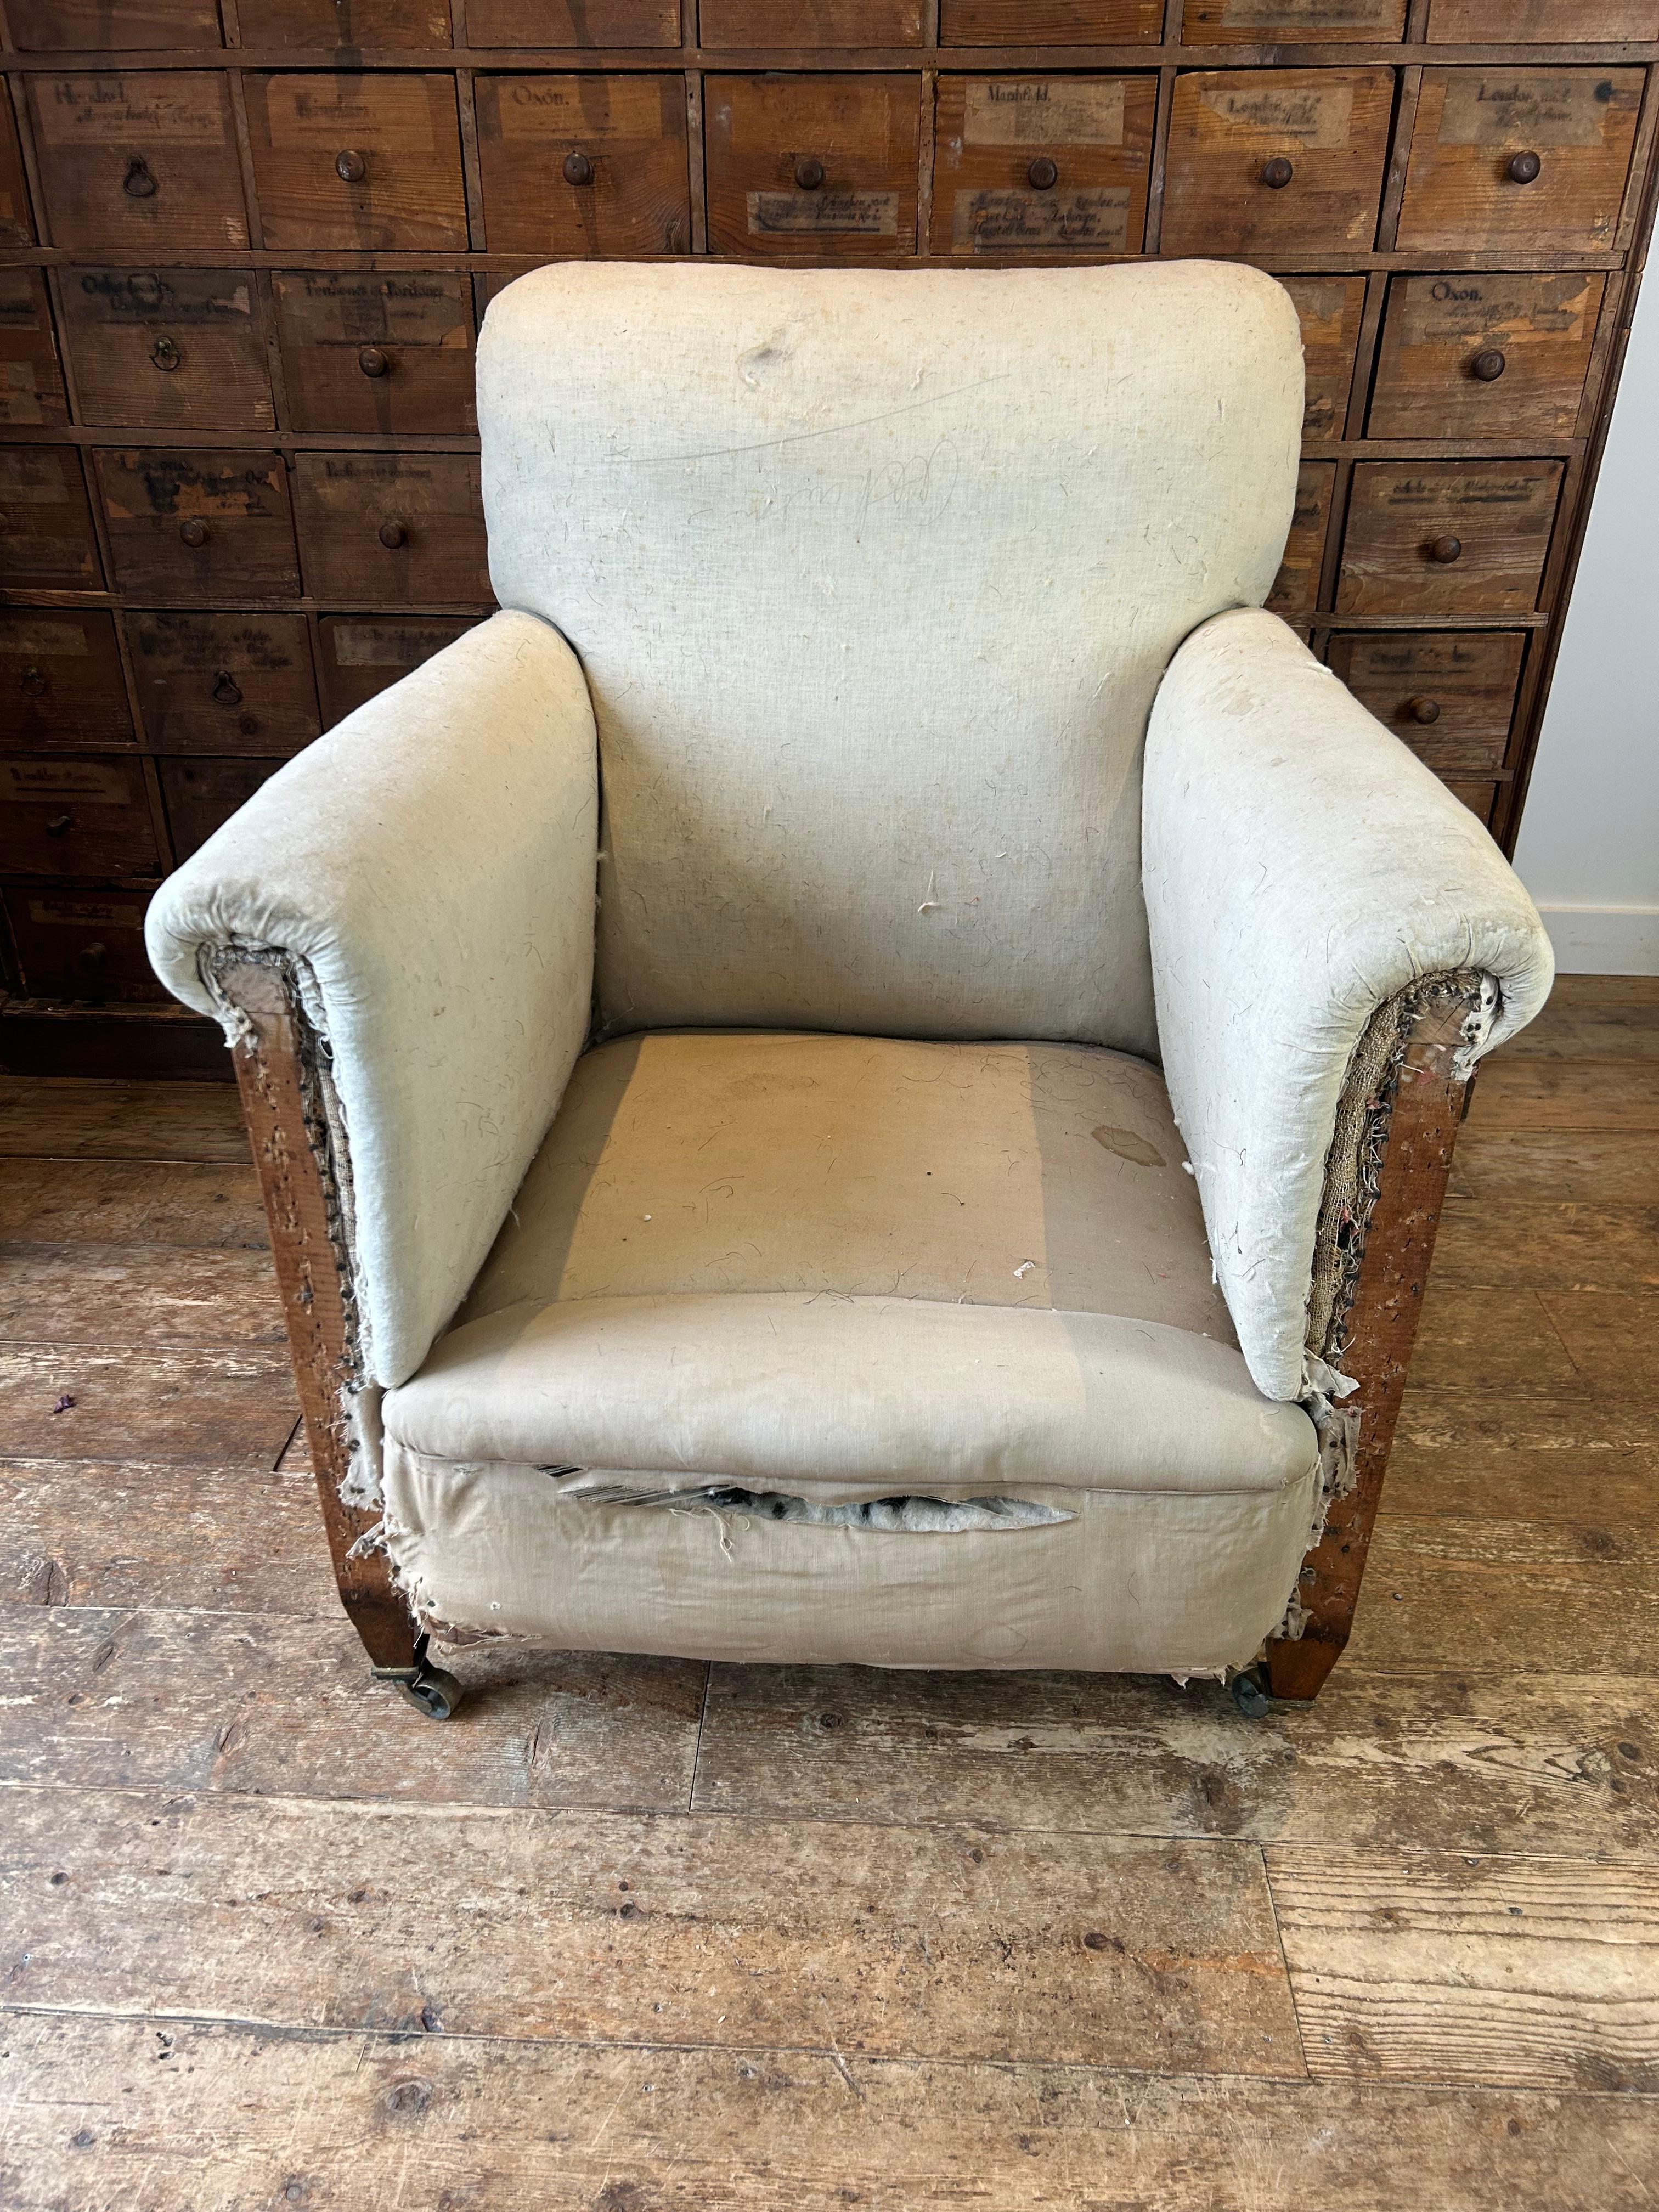 A large scale country house English armchair, by William Birch. The back leg is stamped W.B and numbered 3599, there is also a signature on the rear seat calico. This comfortable armchair retains its original upholstery in the calico on the arms and